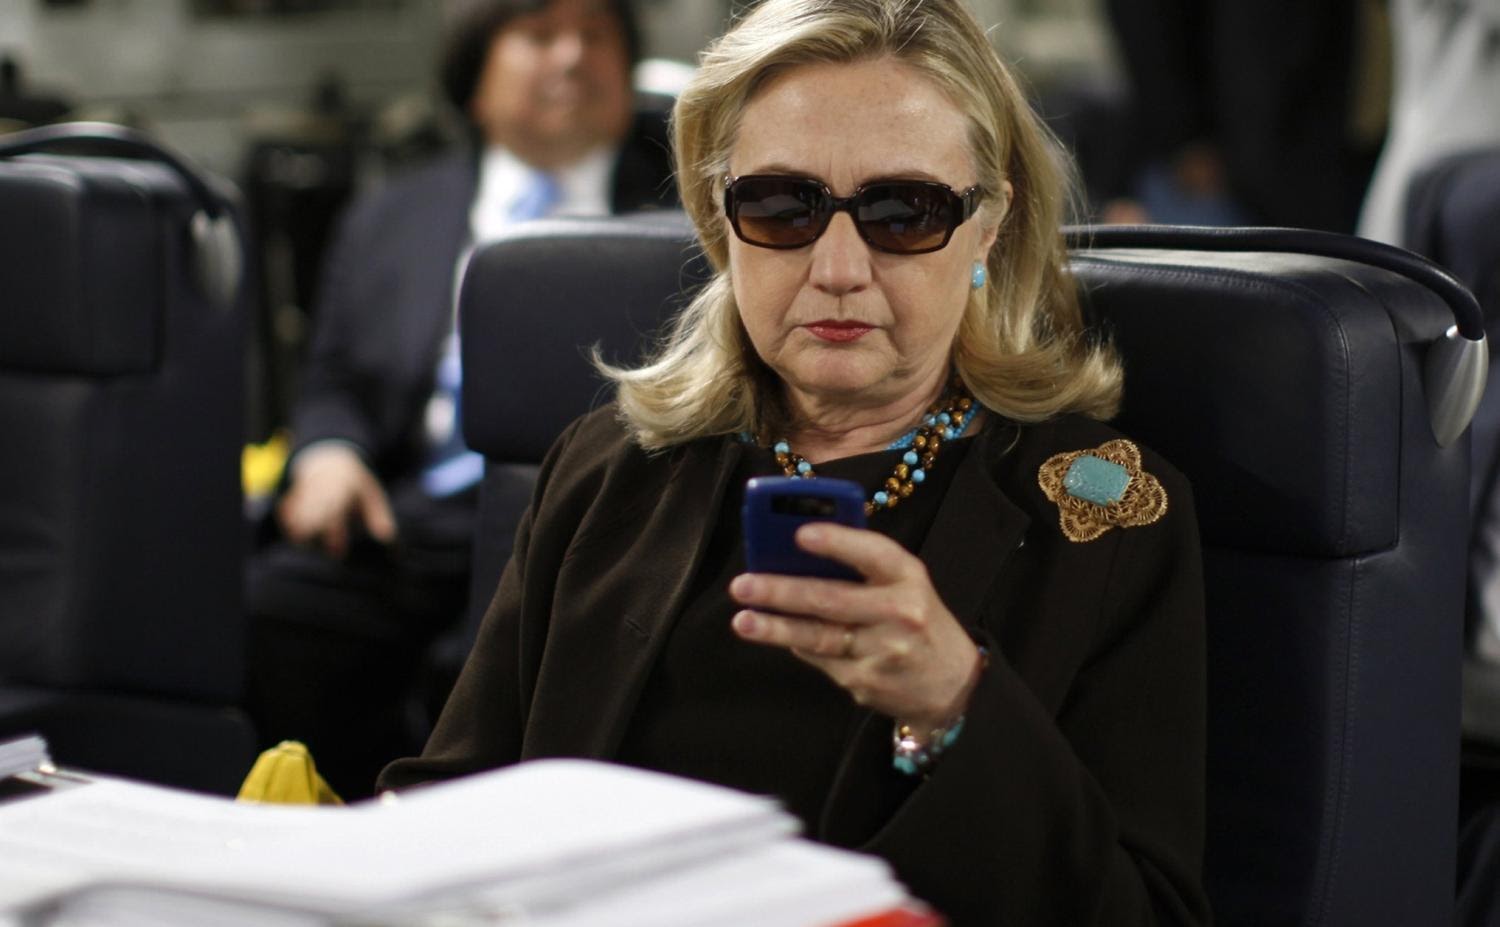 NEW HILLARY EMAILS: STATE DEP&apos;T PAID FACEBOOK FOR 2010 U.S. ELECTION RIGGING